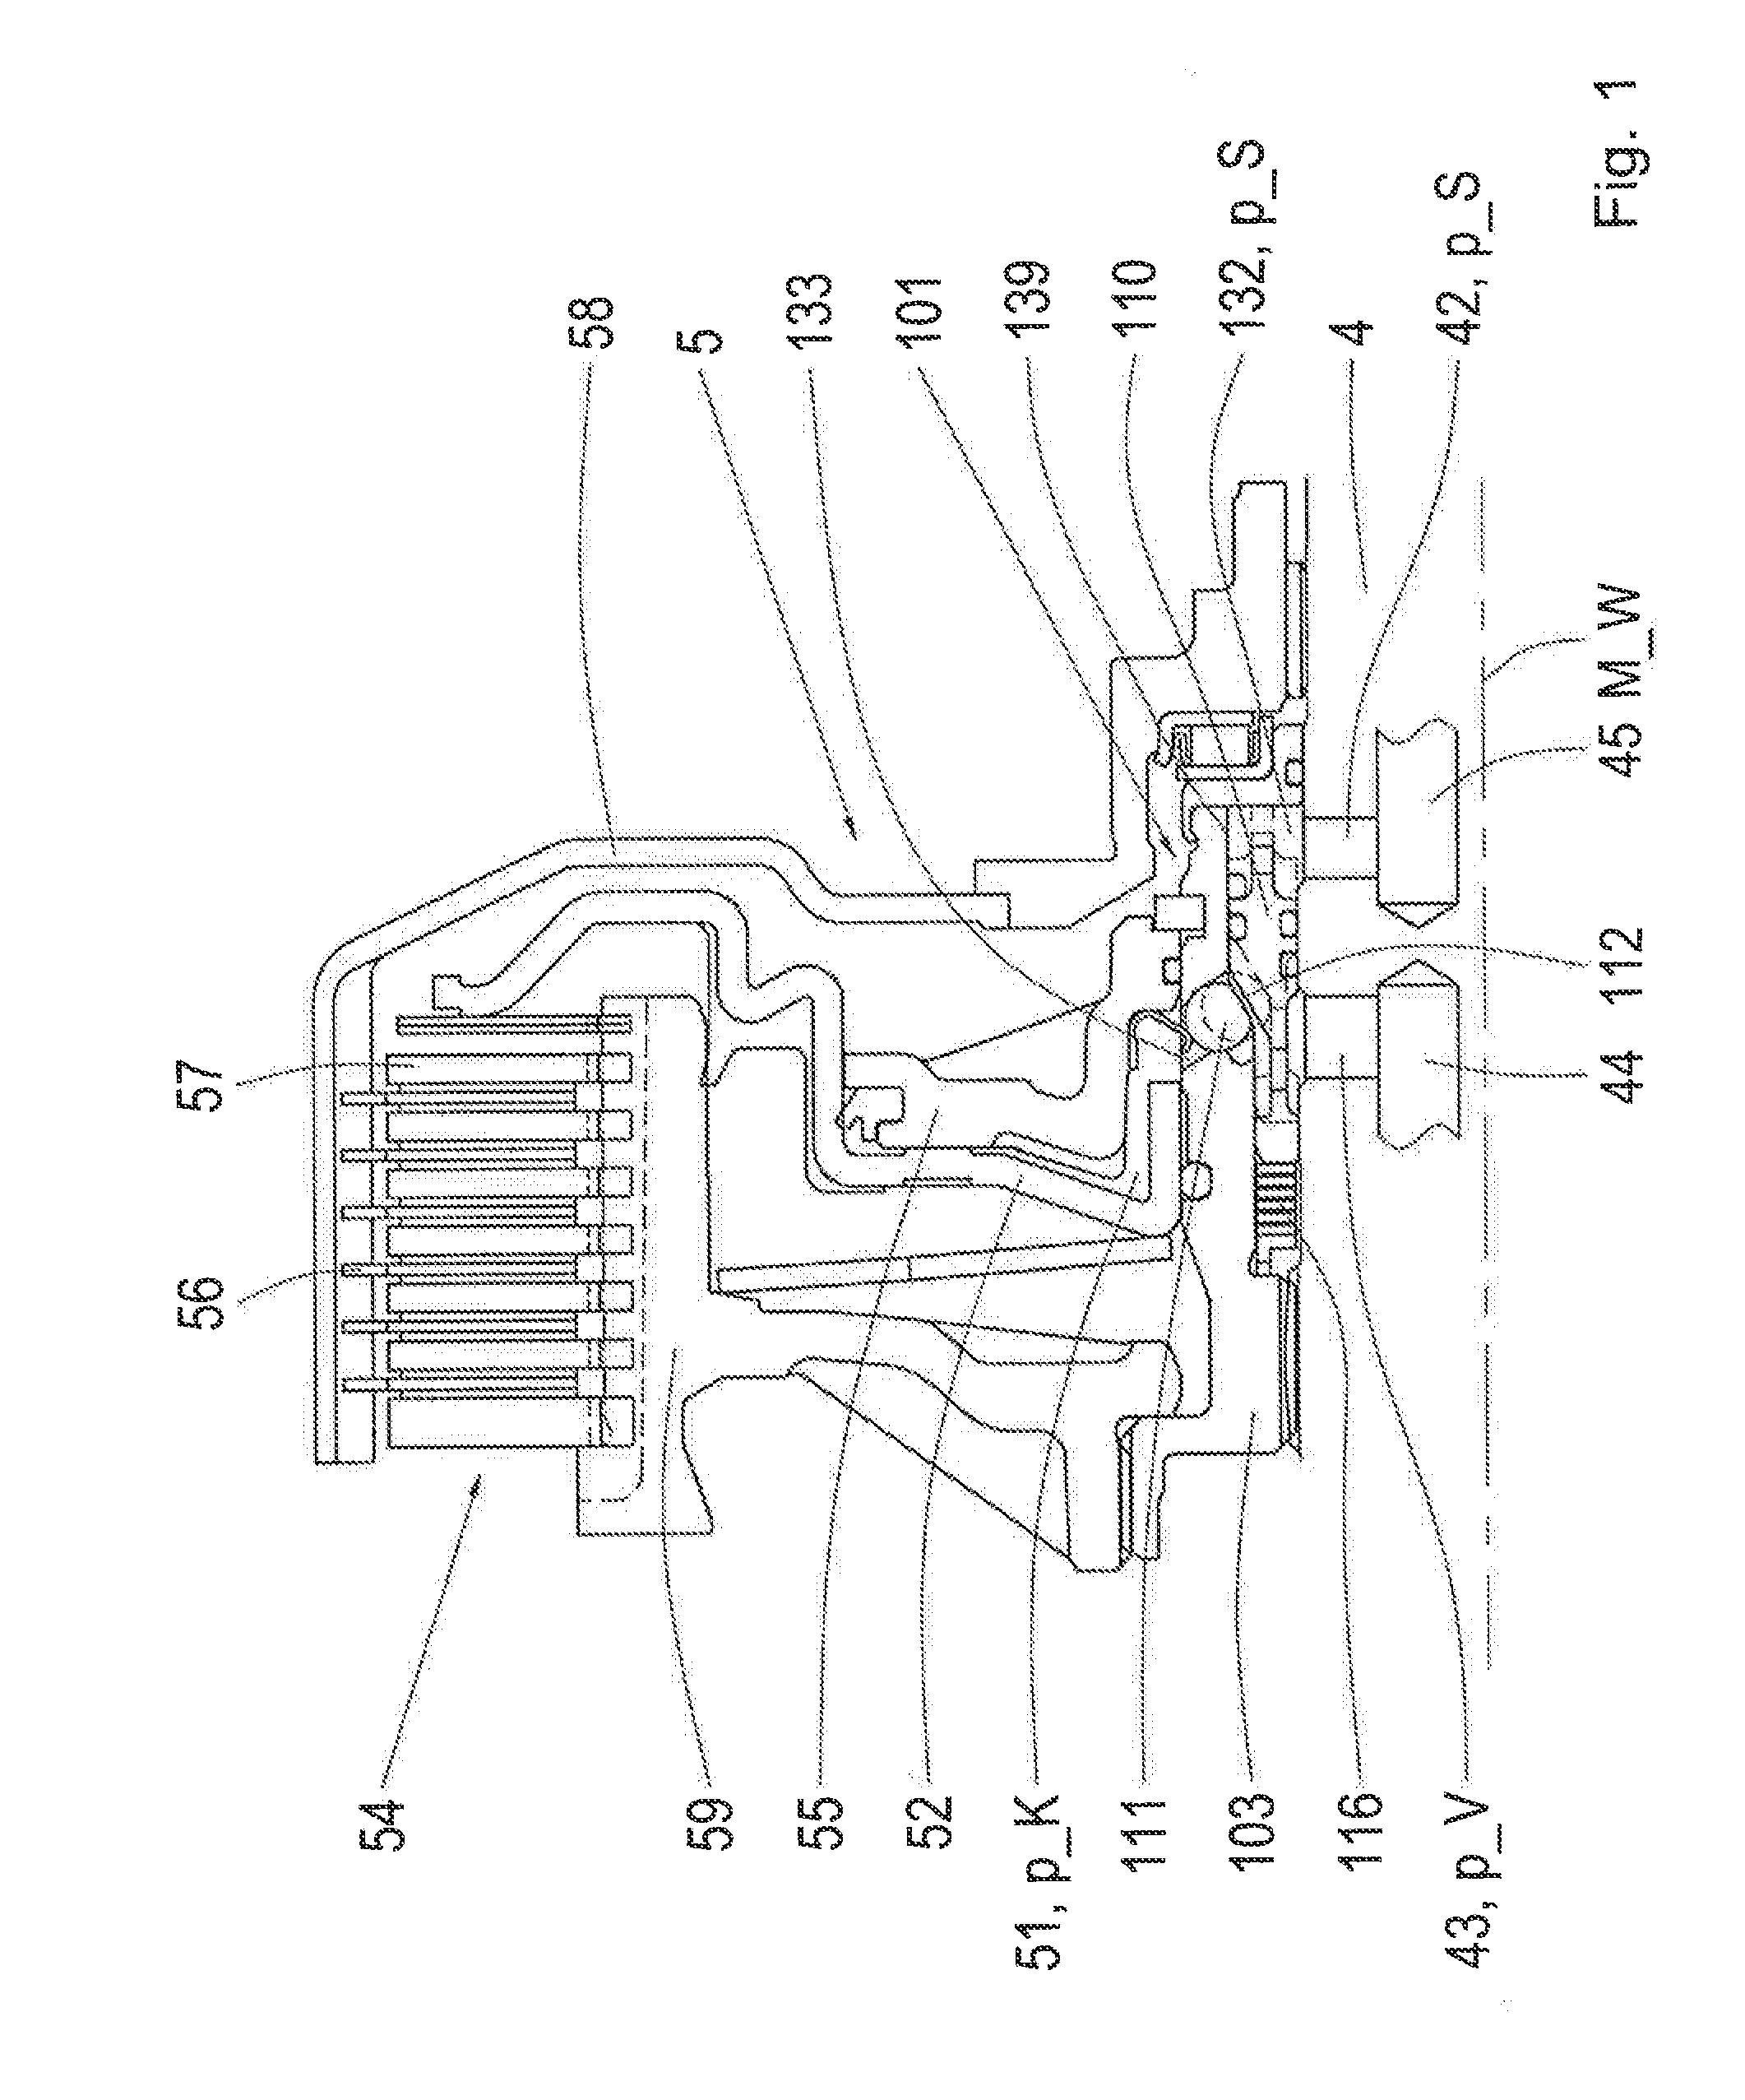 Hydraulic system for an automatic transmission